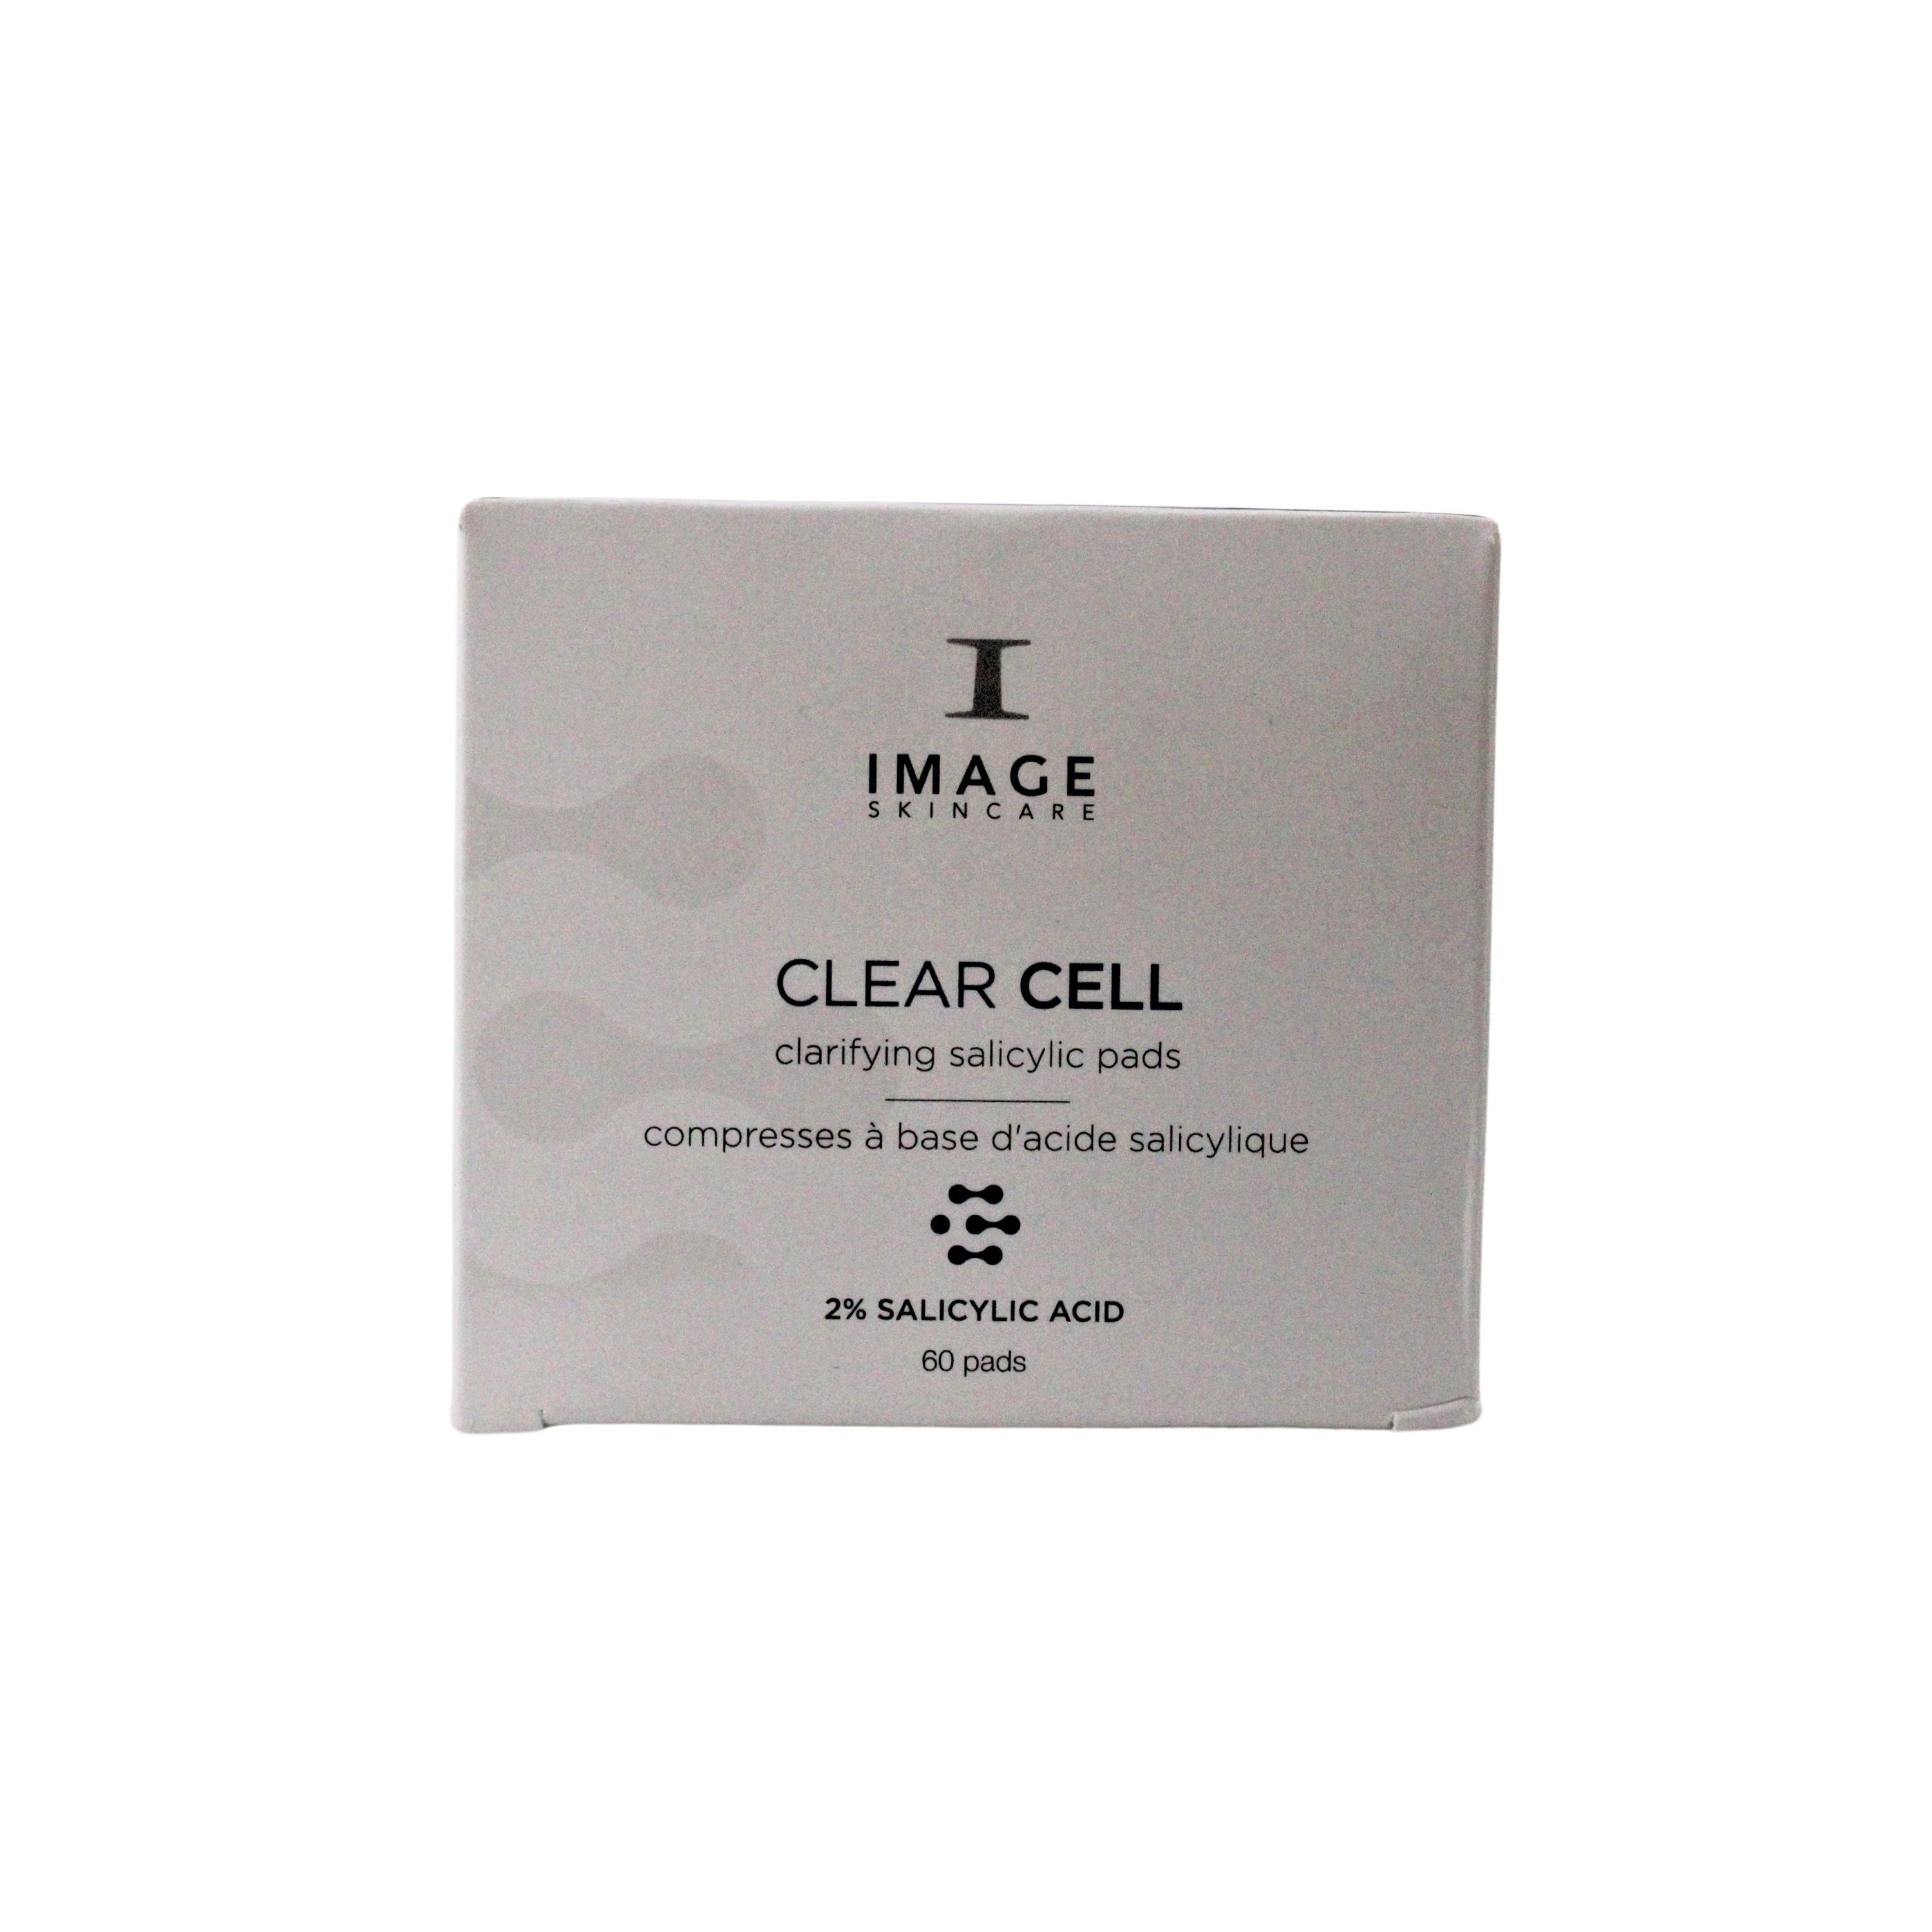 Image Skincare Clear Cell Salicylic Clarifying Pads 60 Pads